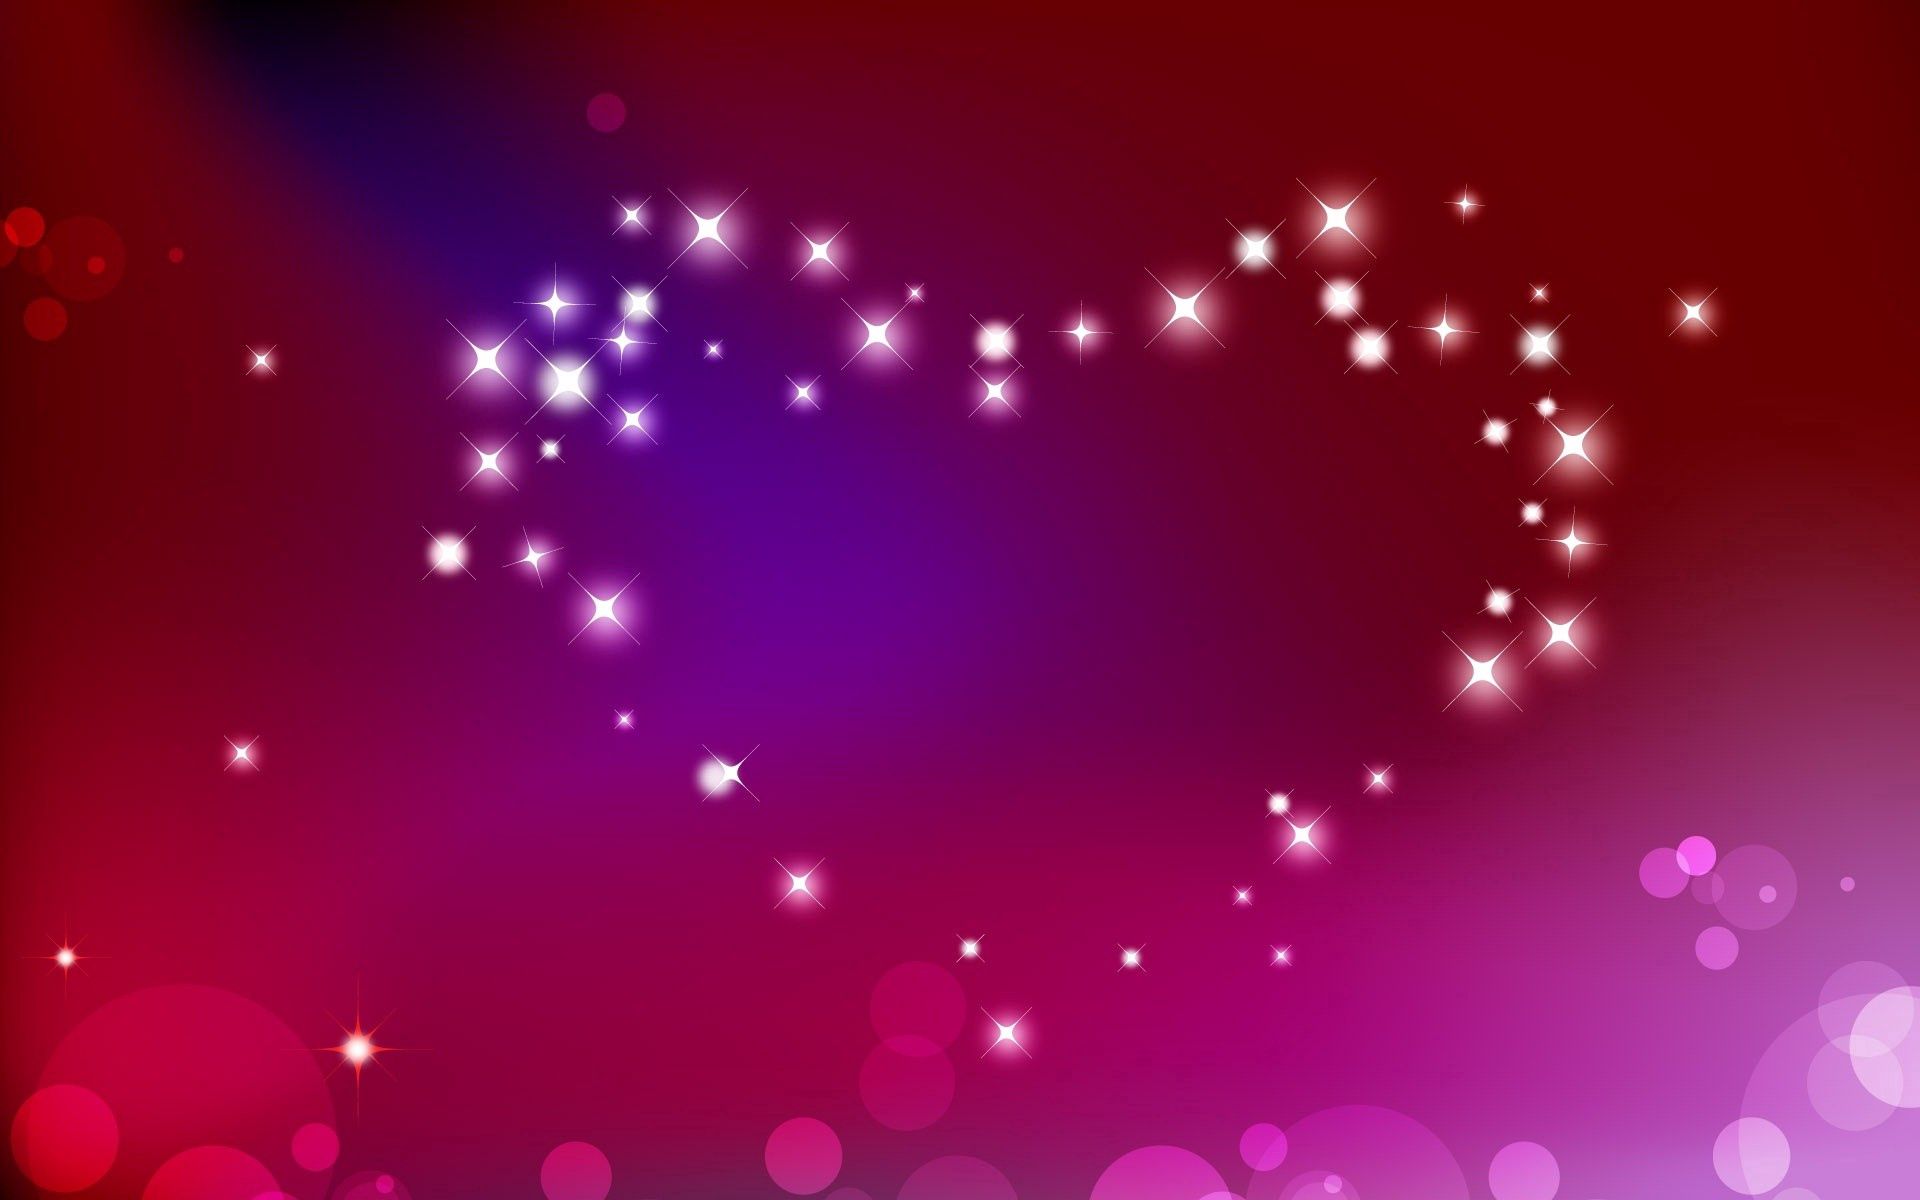 Mobile Wallpaper Points shining, brilliance, heart, abstract